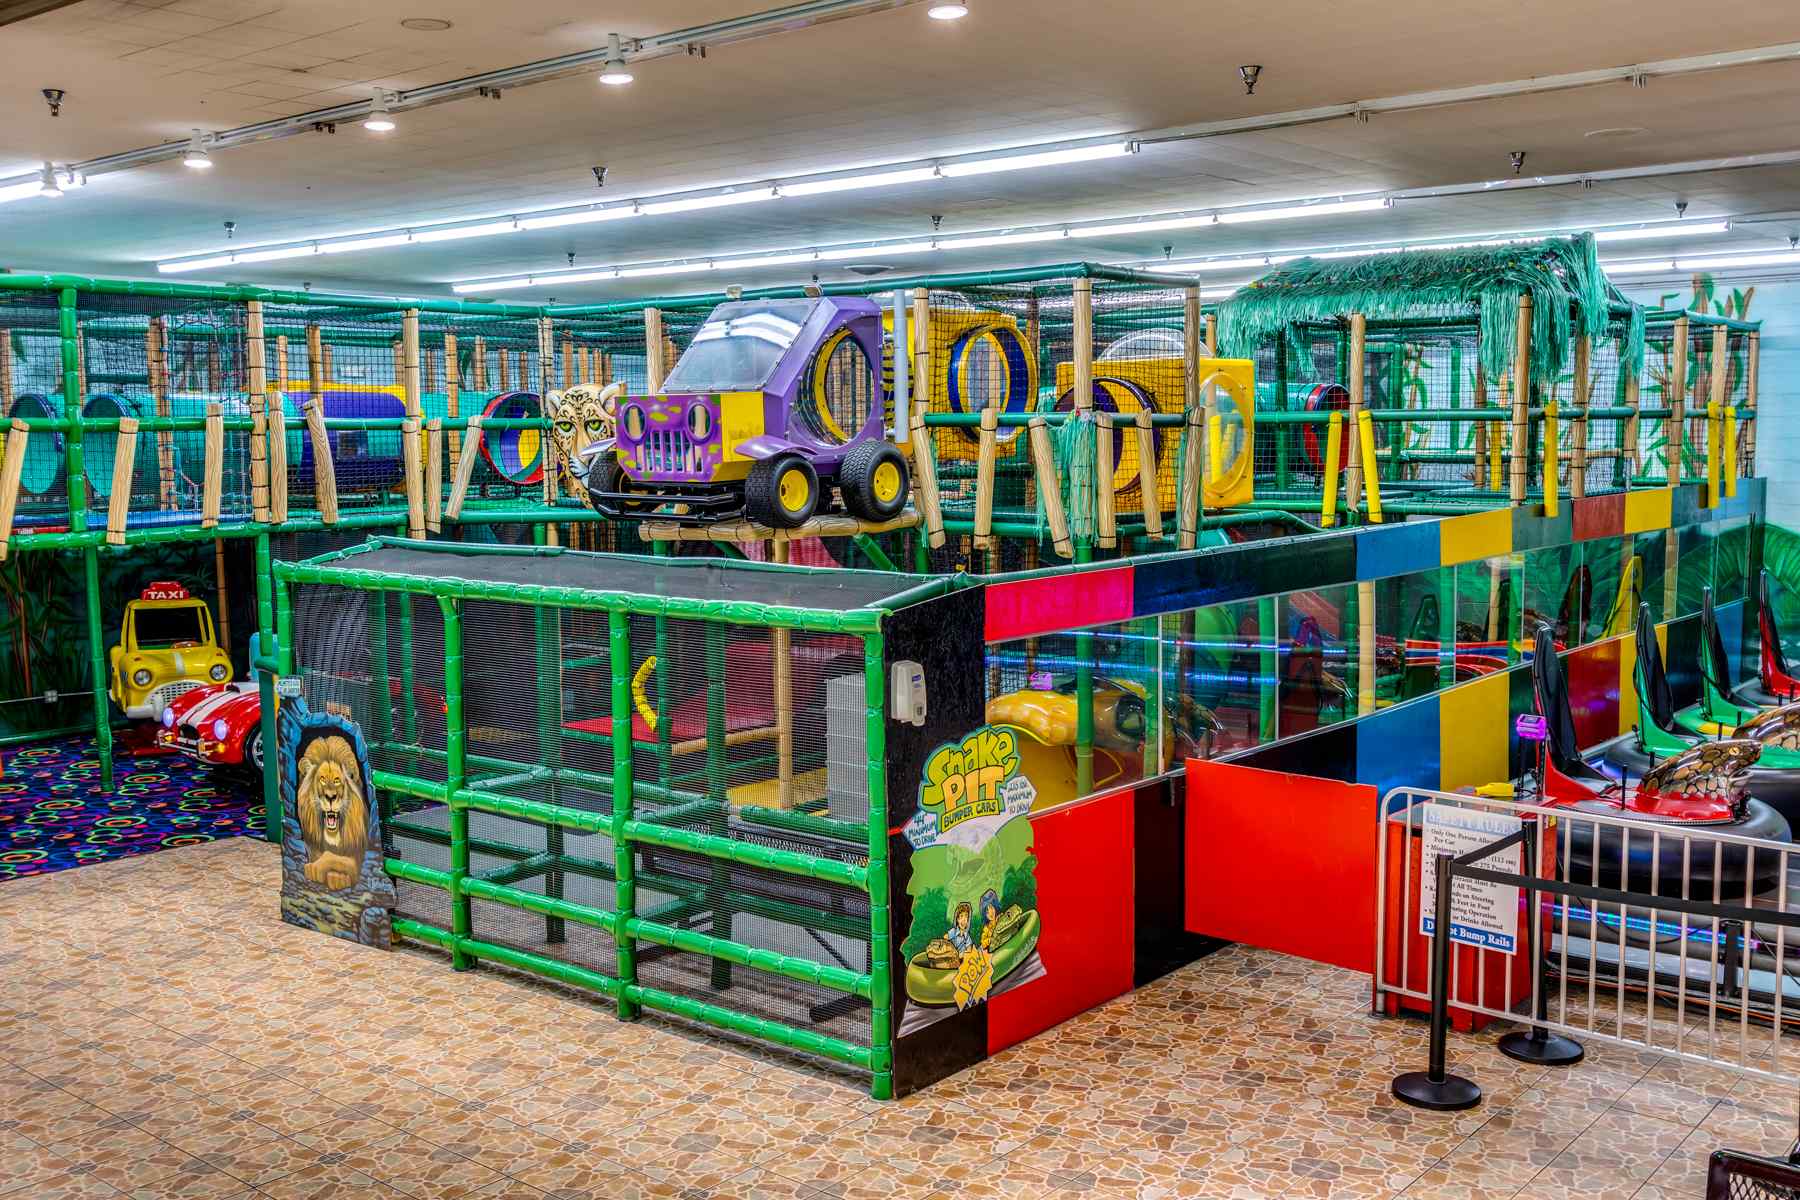 A large indoor playground with cars and other toys.